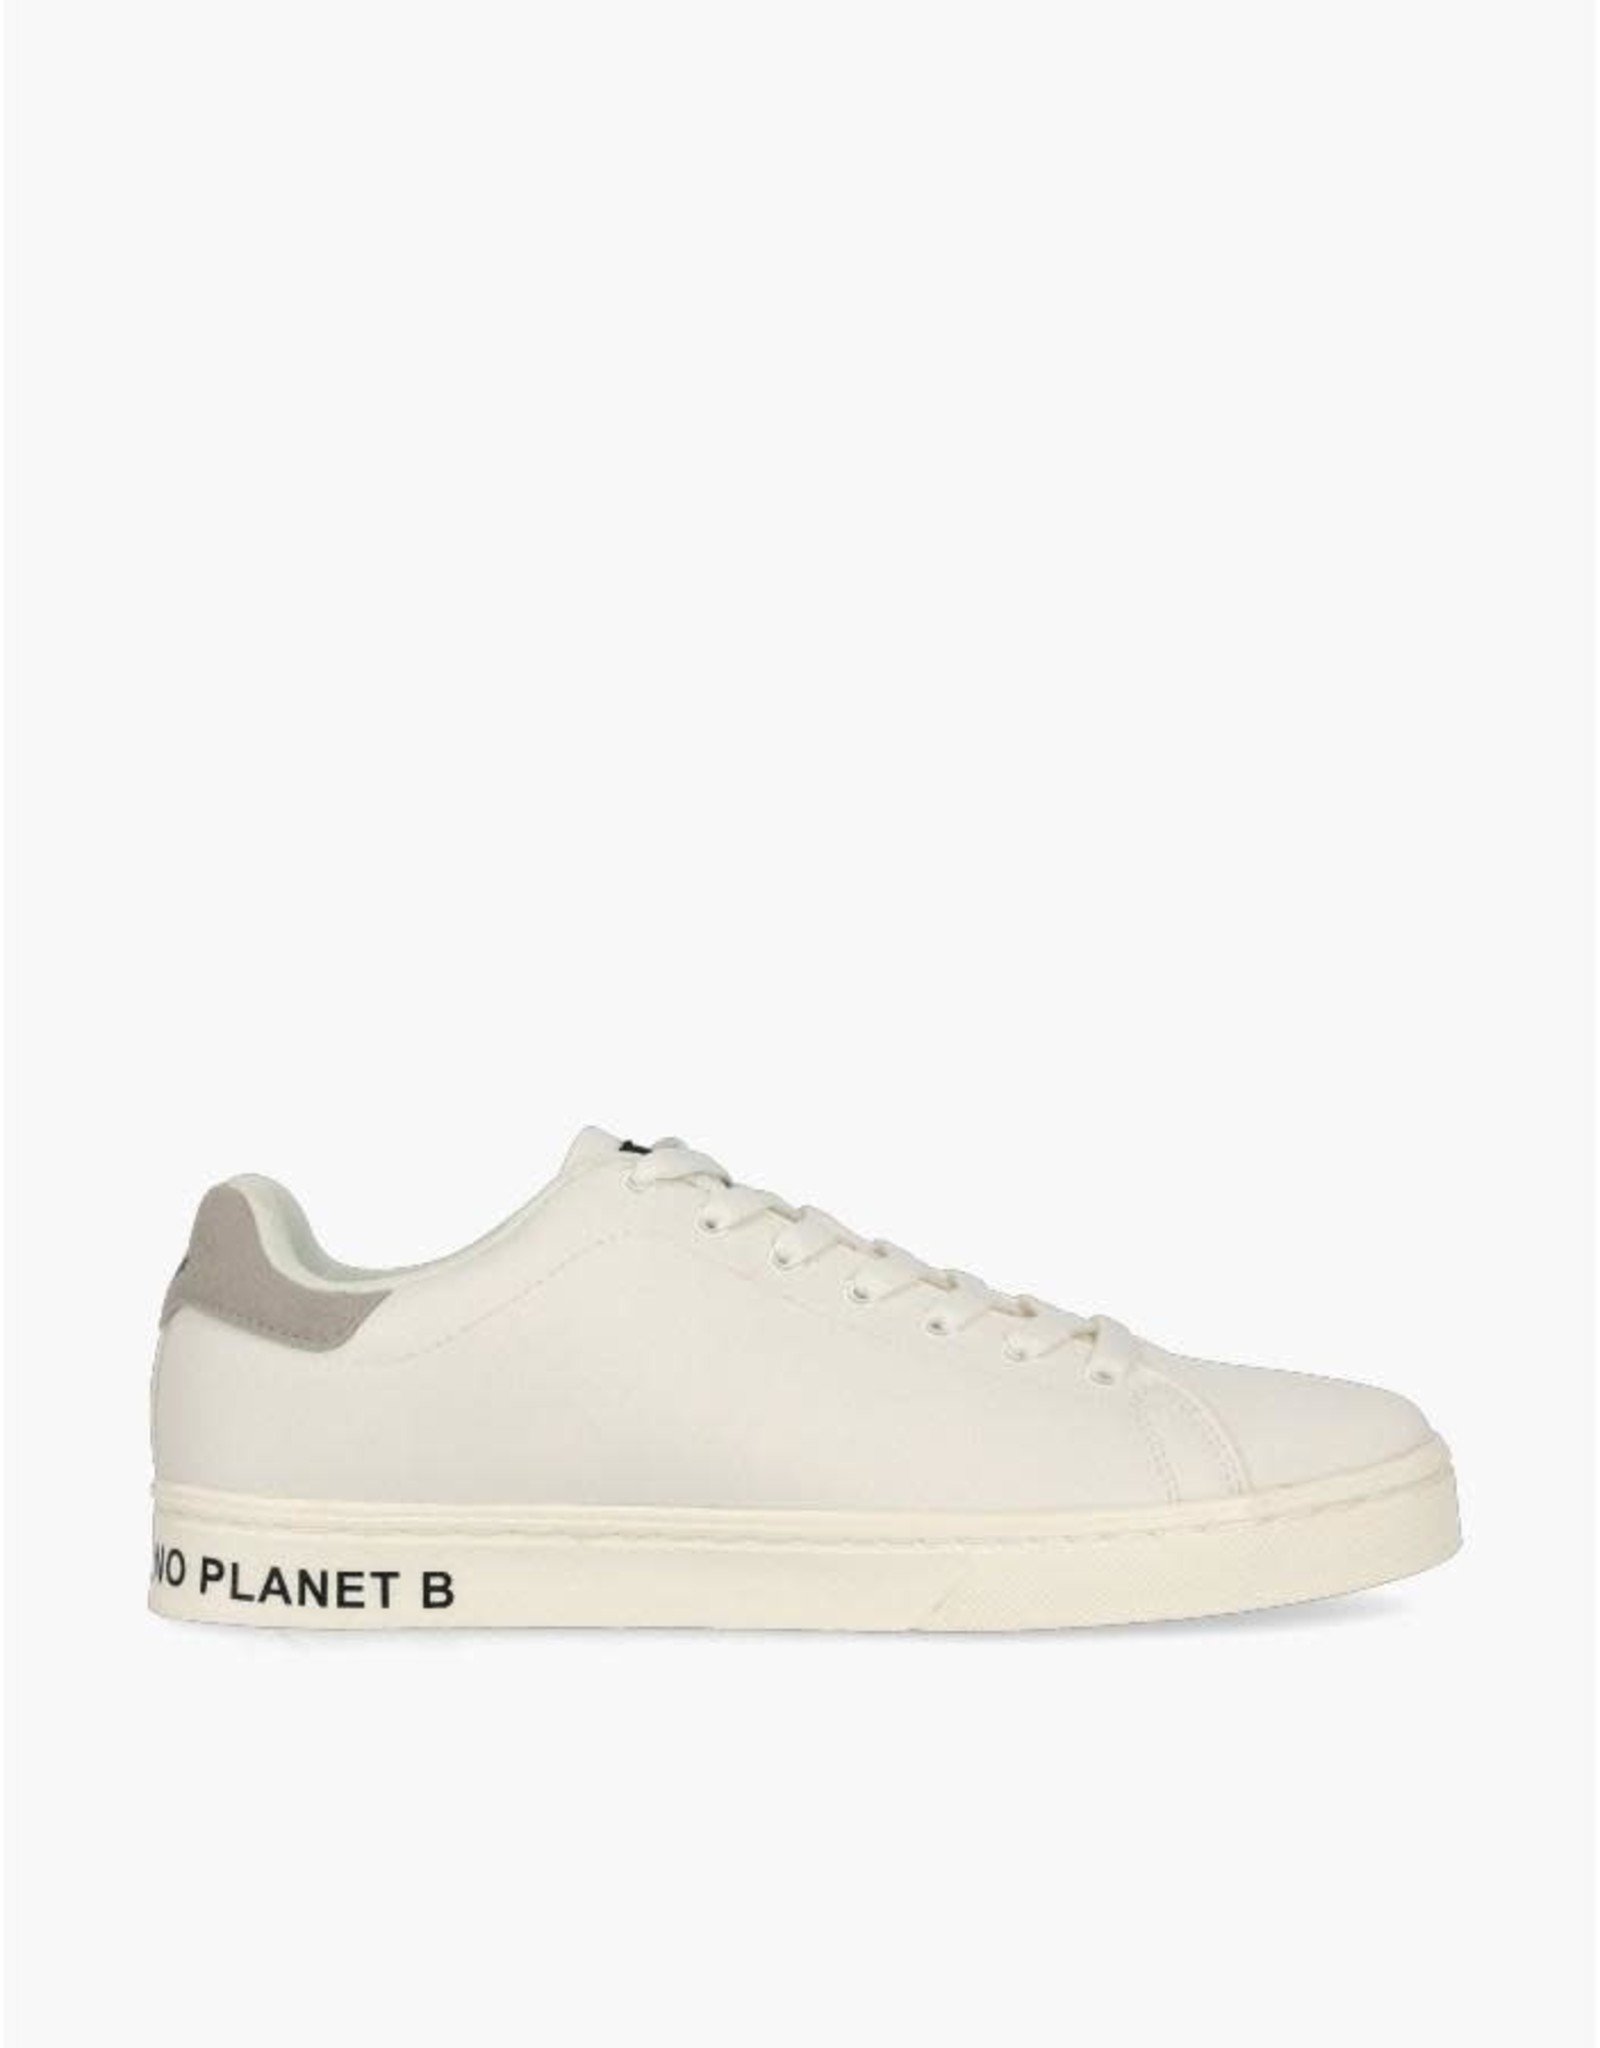 ECOALF VEGAN SANDFORD ACT NOW TRAINERS FROM ECOALF "THERE IS NO PLANet B". DESIGN REF SHSNSANDF2560